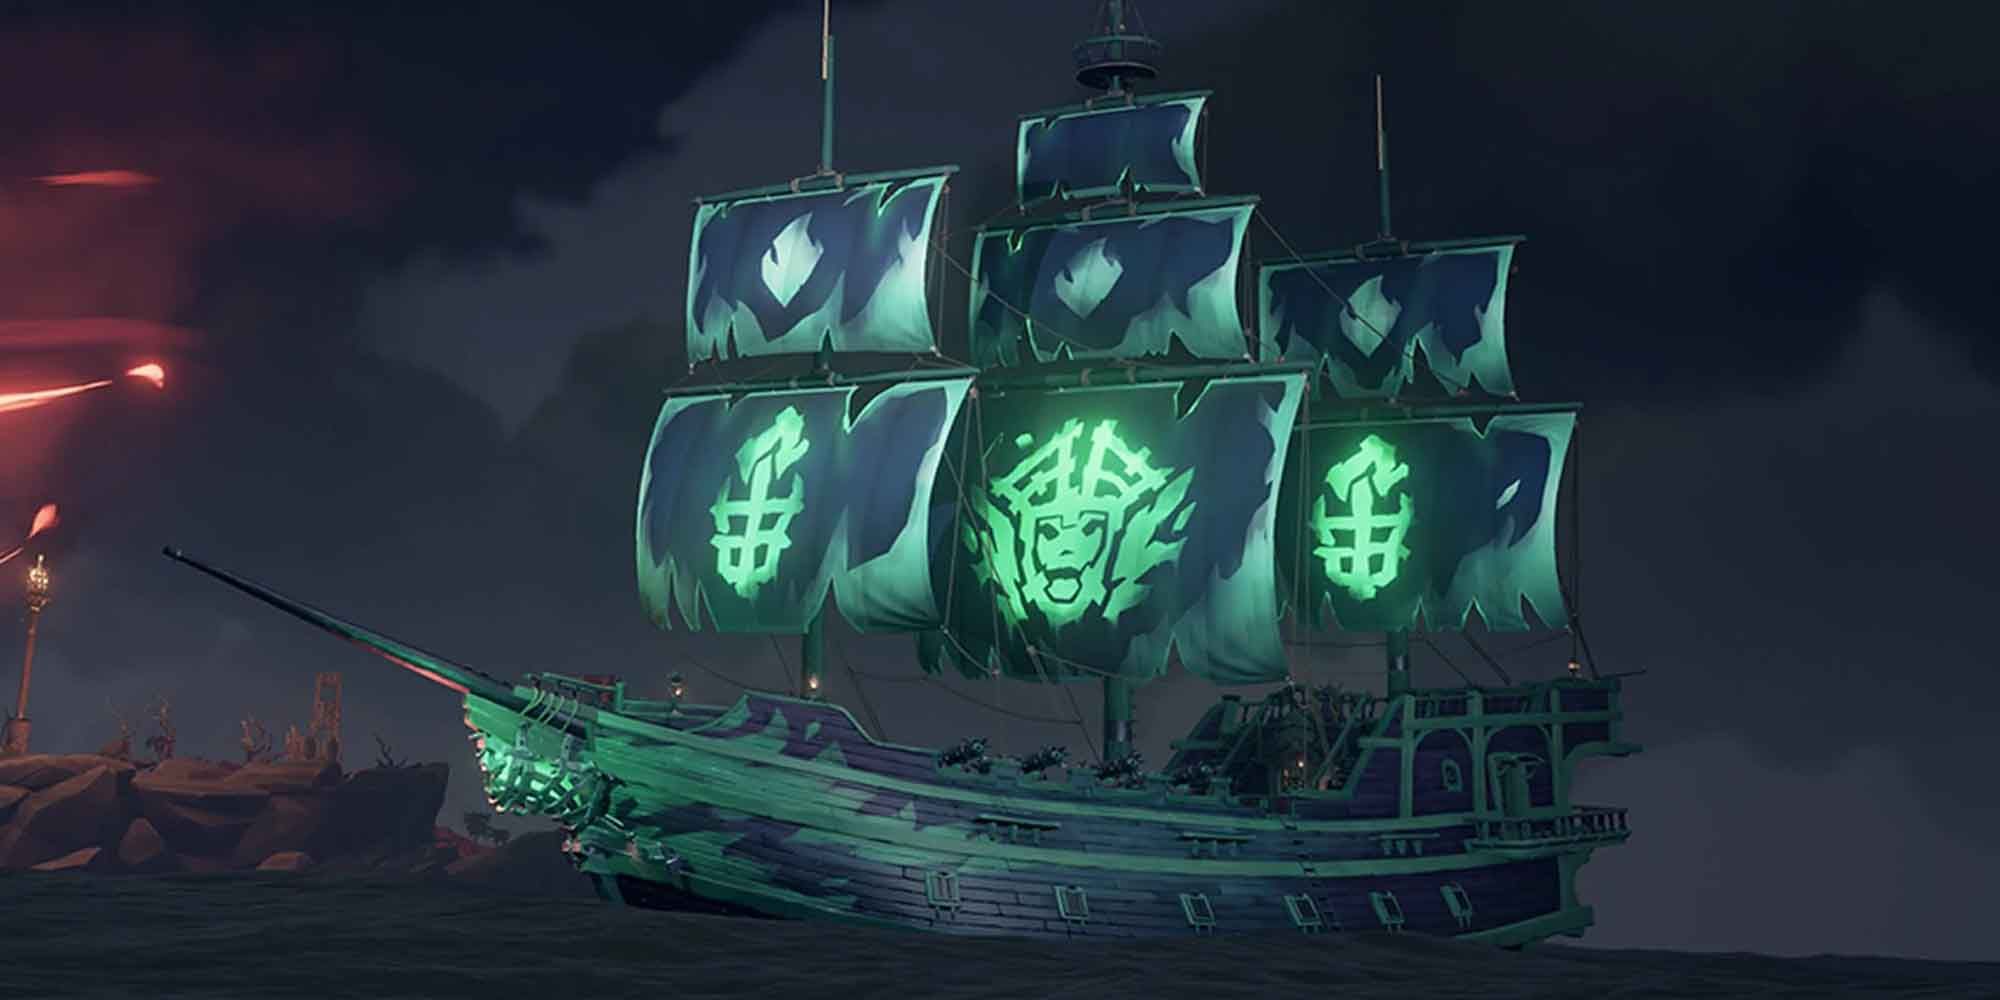 Soulfire Set Sails in Sea of Thieves